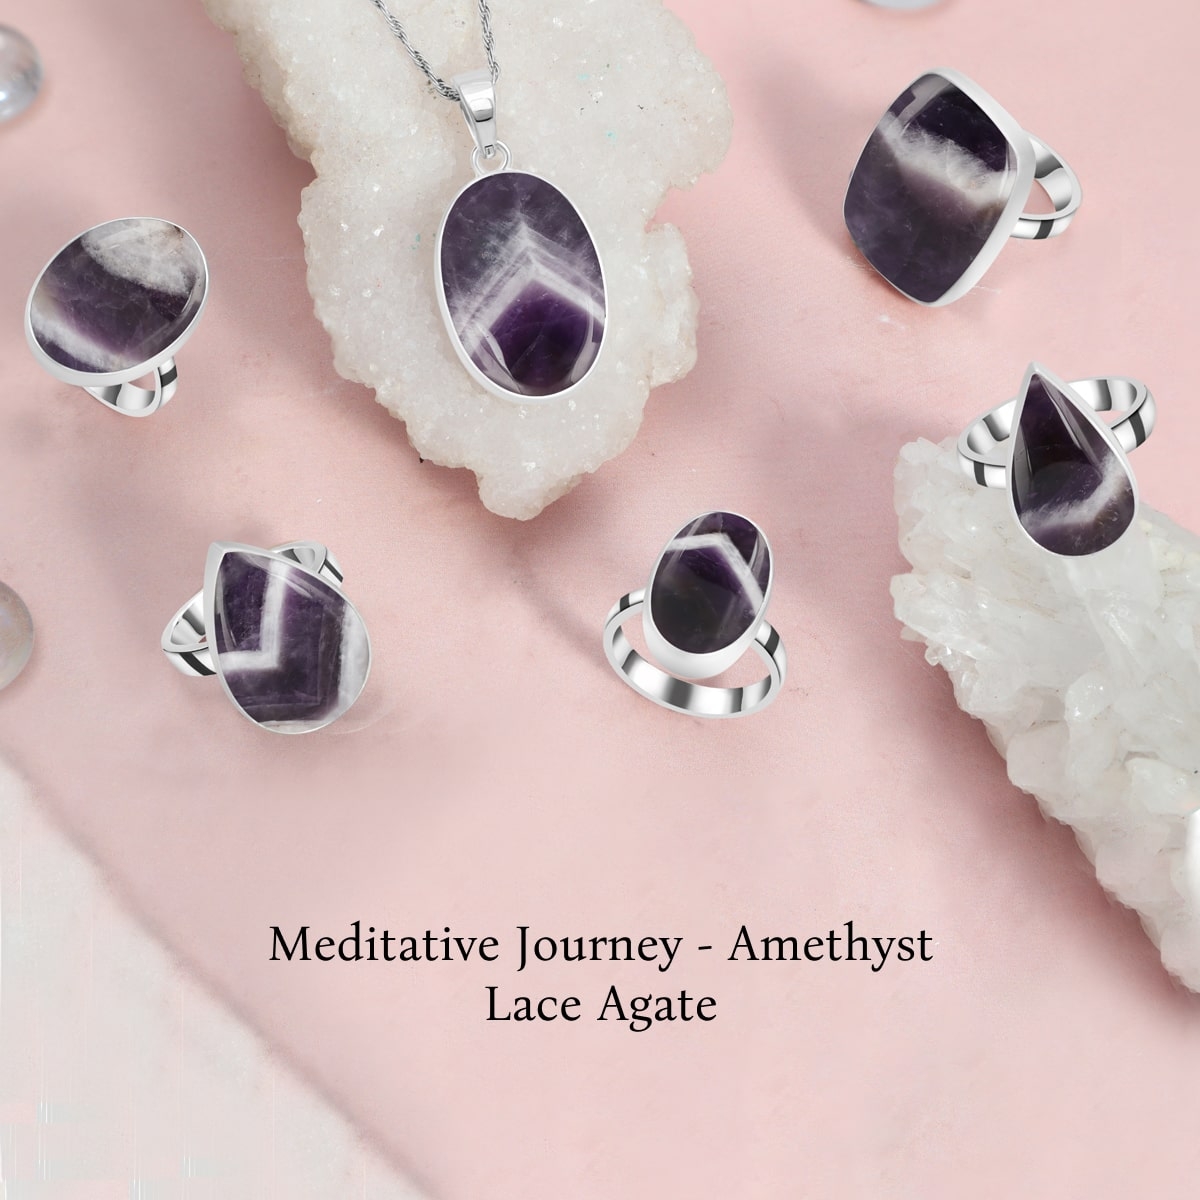 Meditation and Amethyst Lace Agate